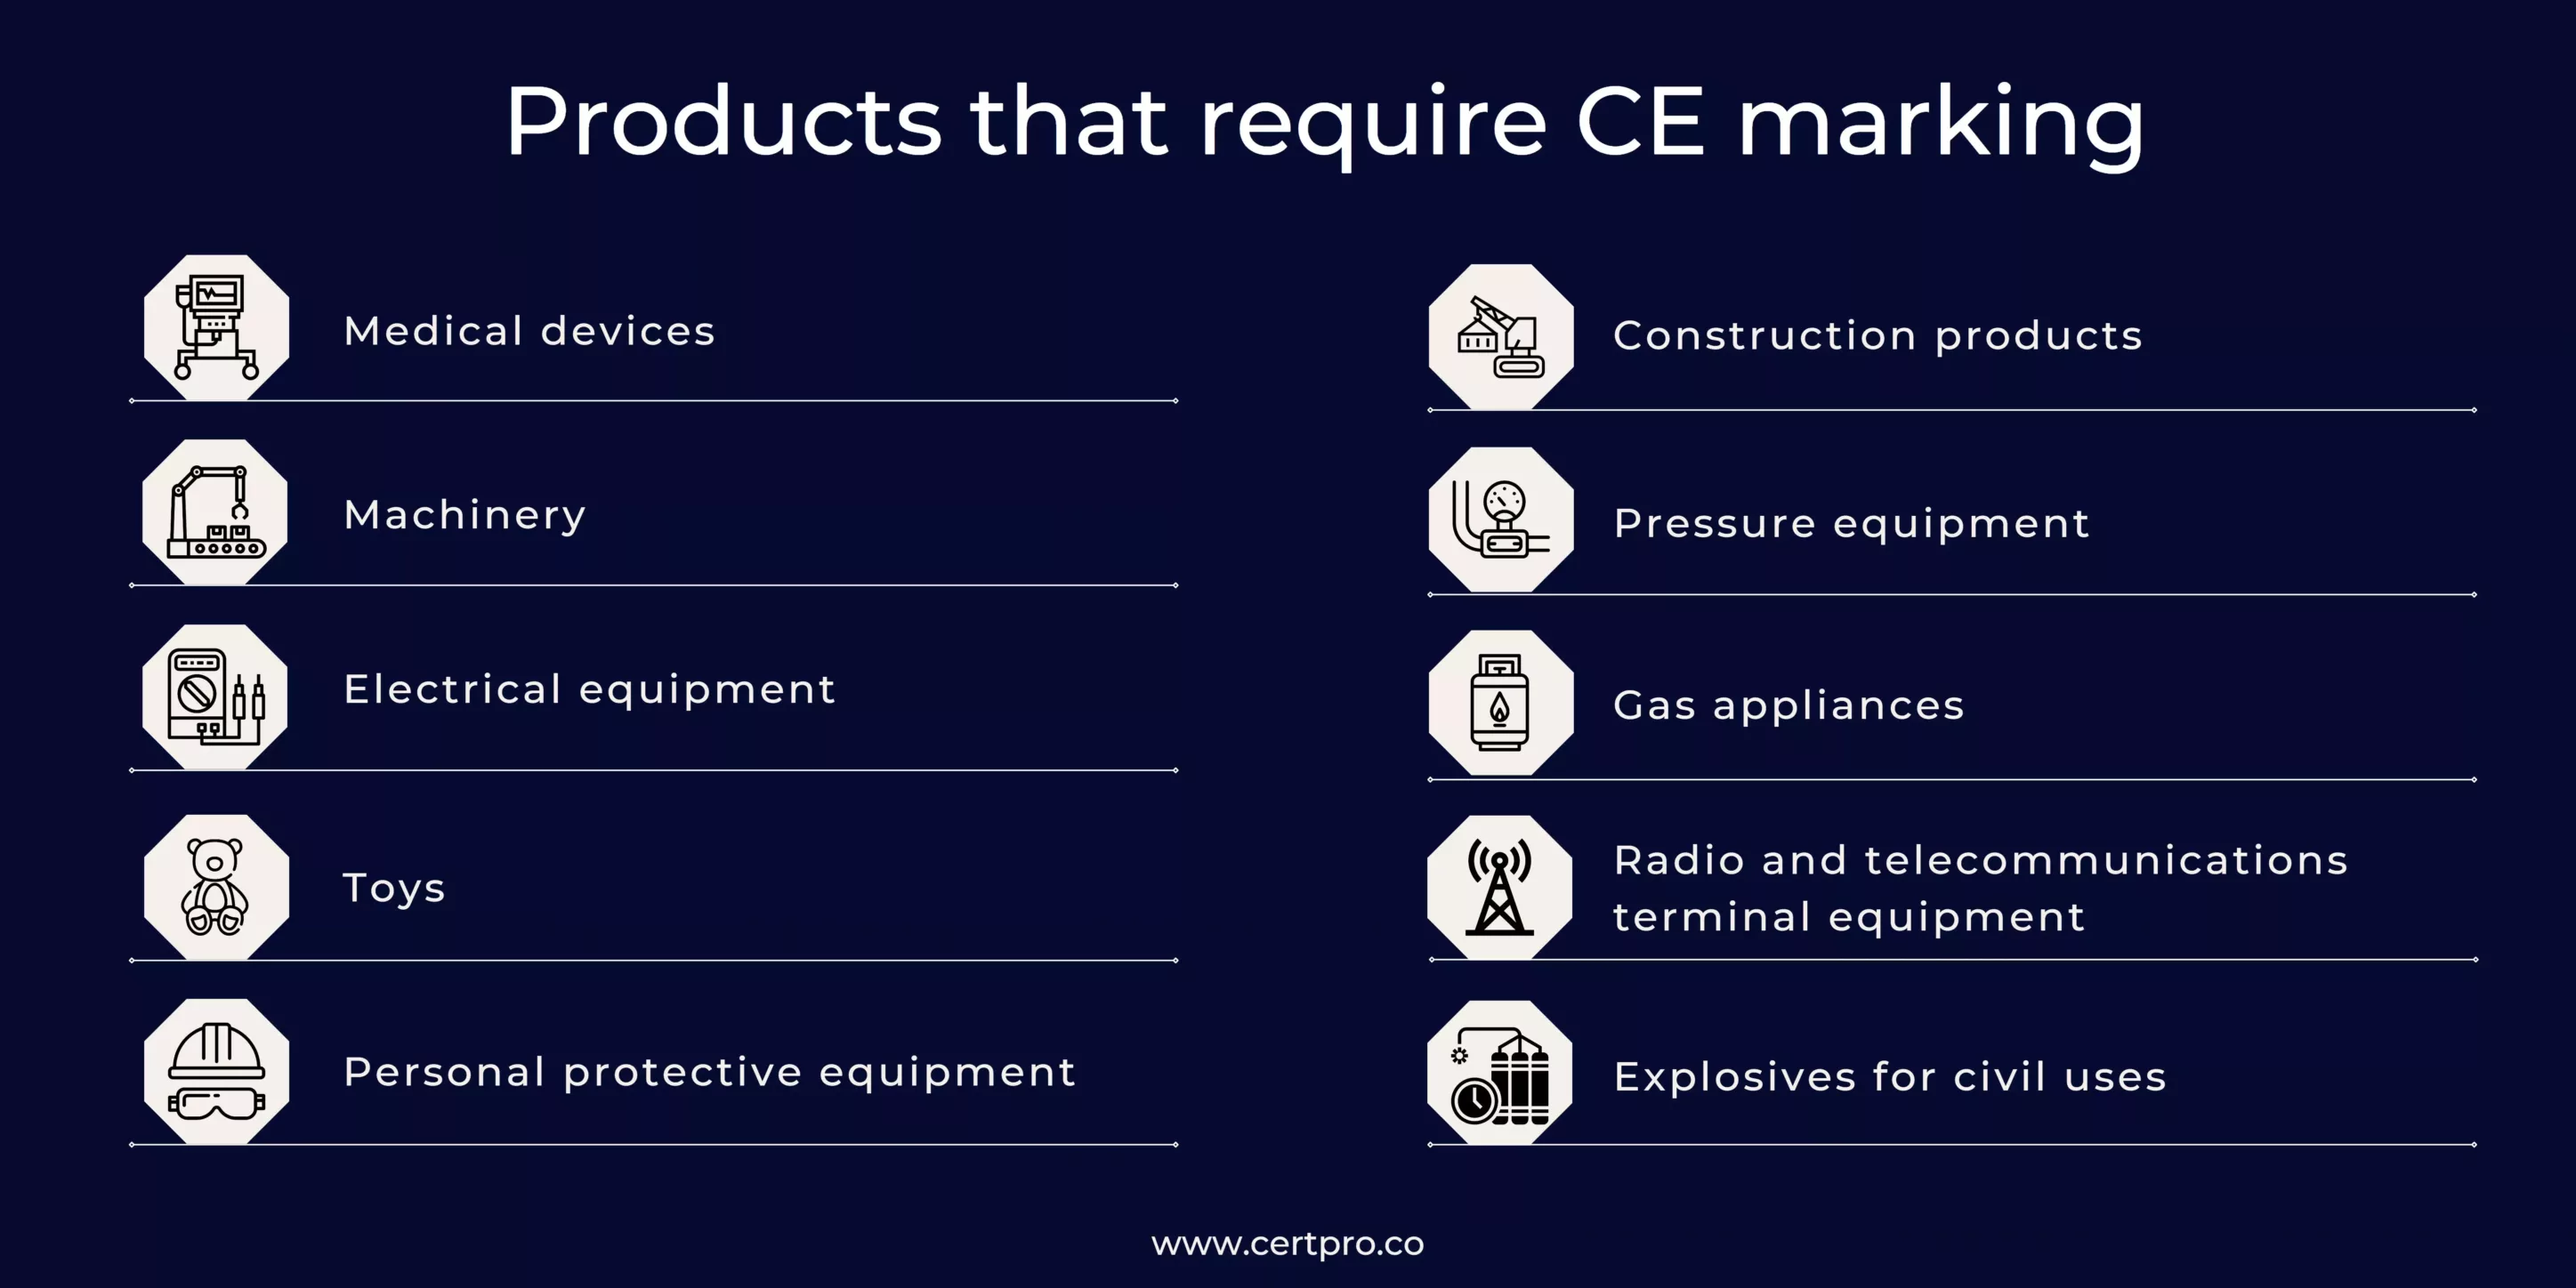 PRODUCTS OF CE MARKING